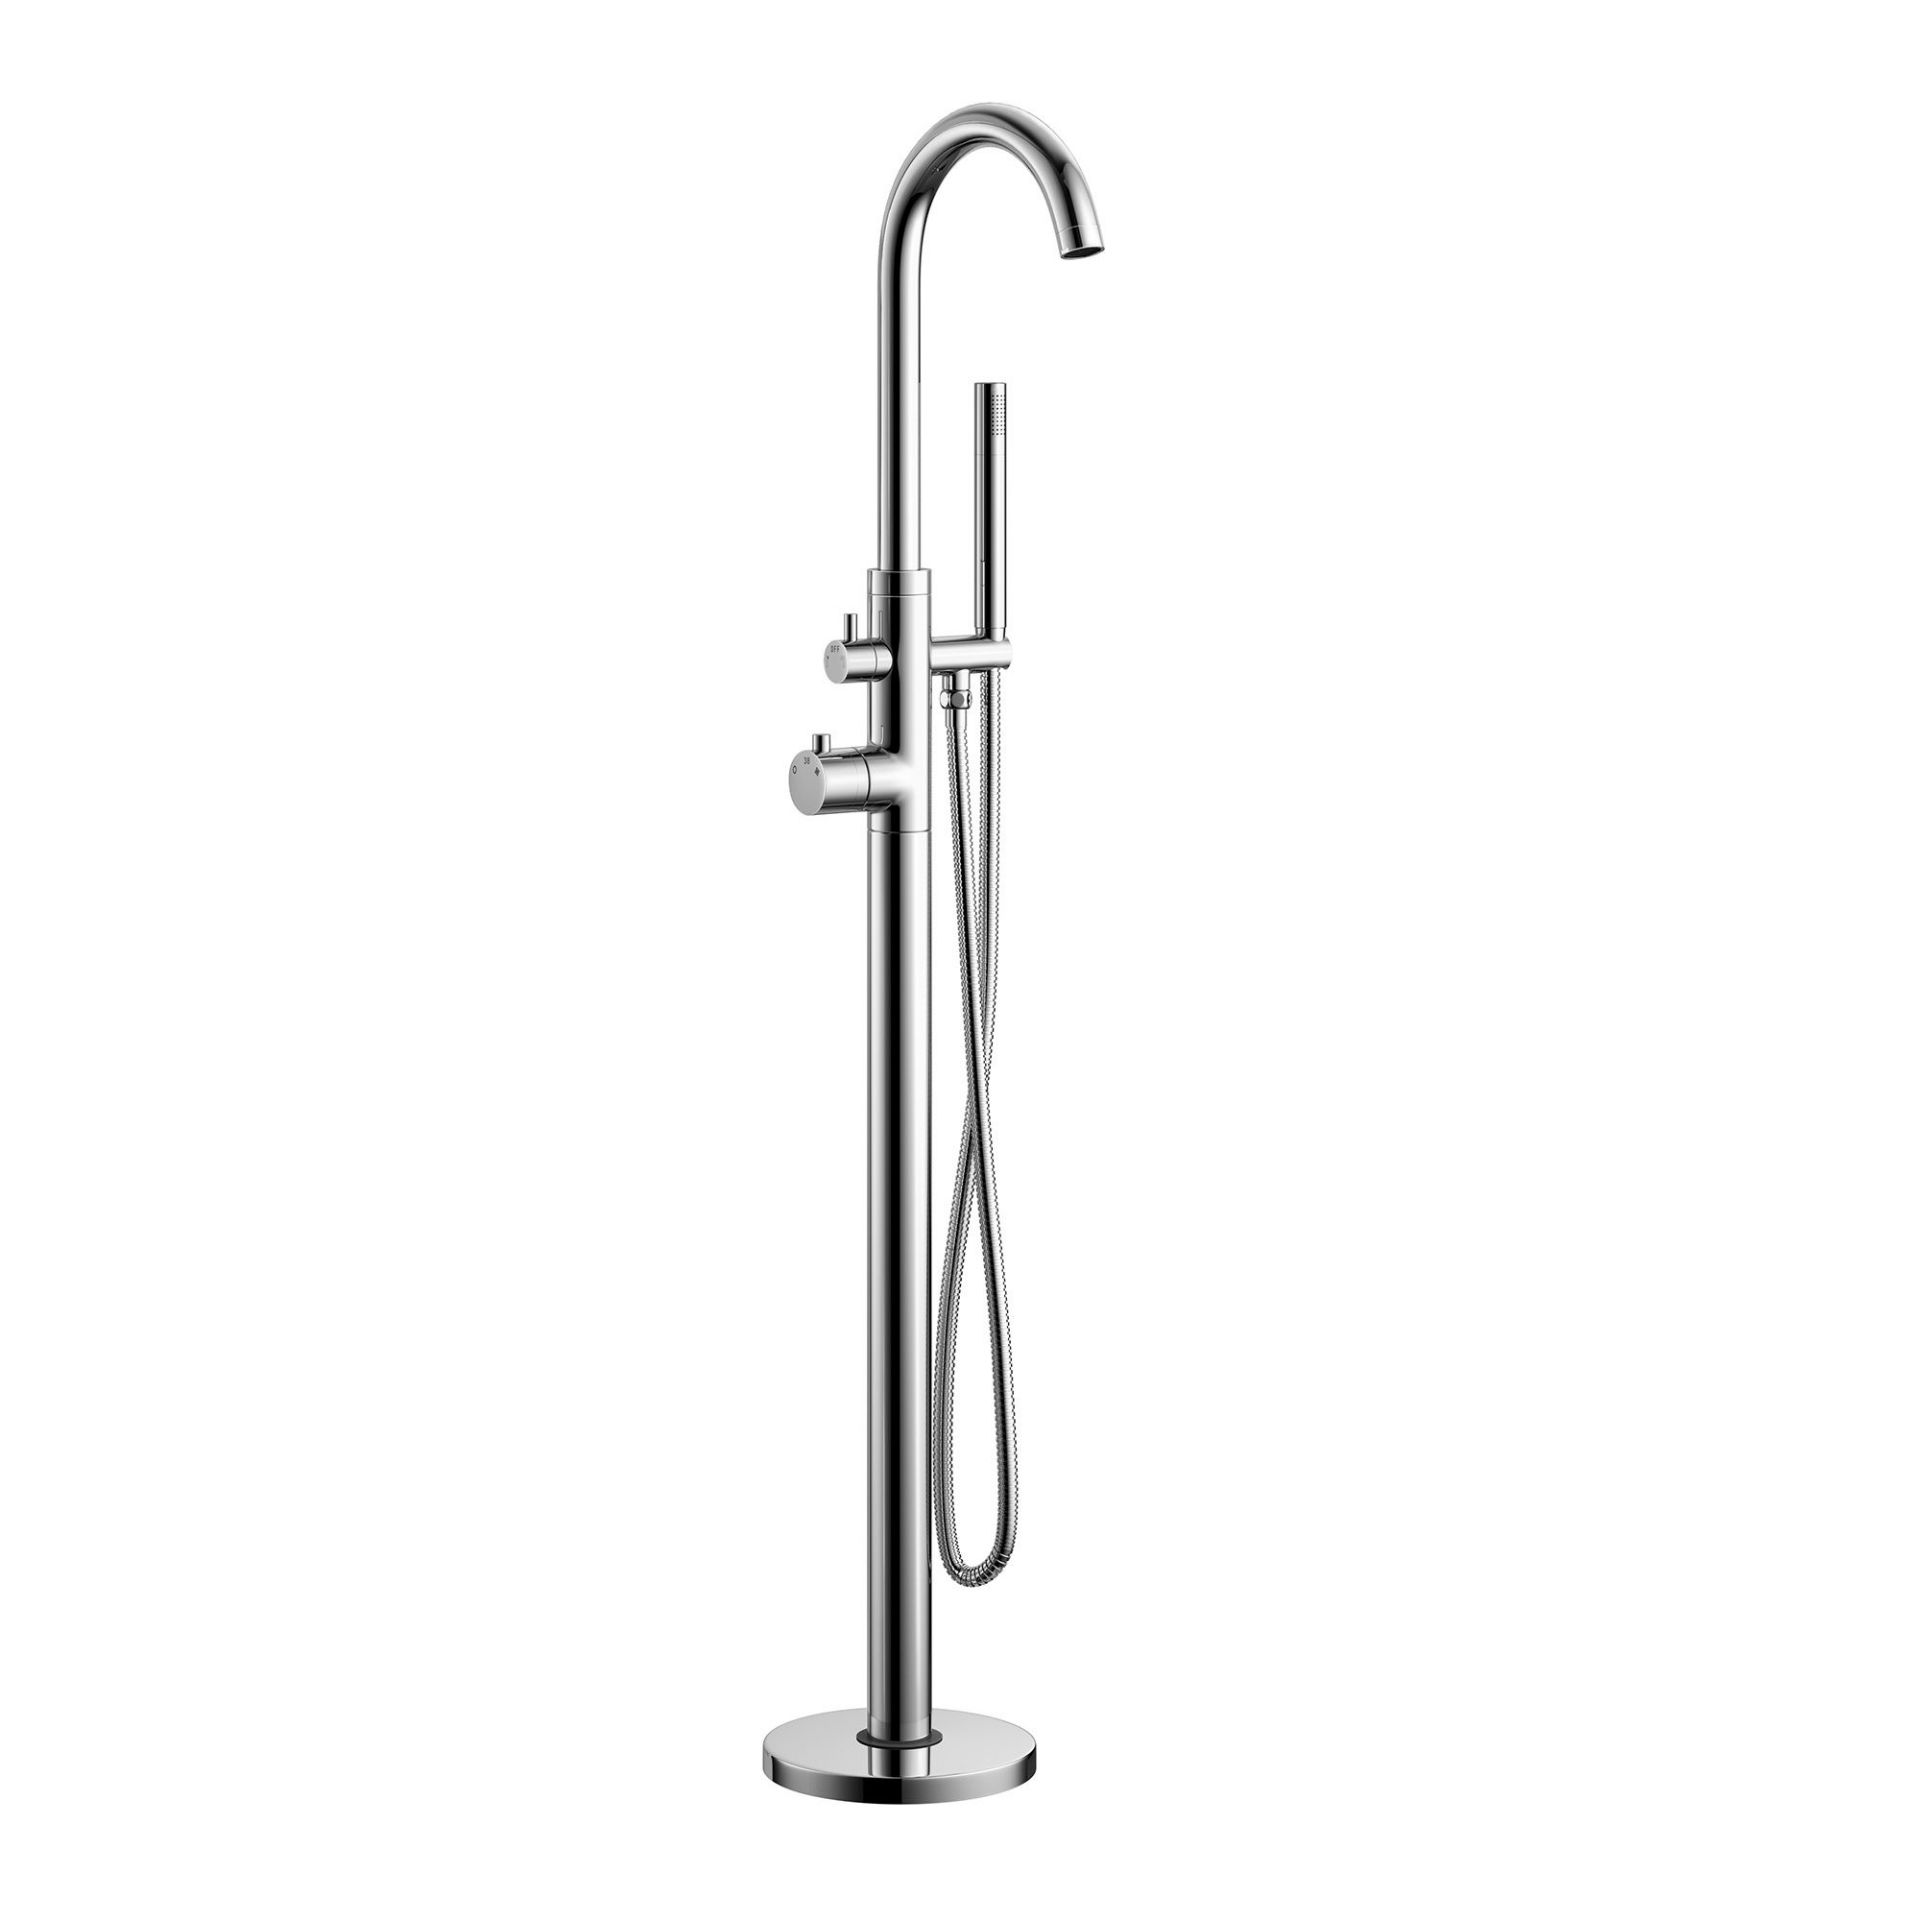 (TT8) Gladstone Freestanding Thermostatic Bath Mixer Tap with Handheld Shower Head. RRP £499.9... - Image 2 of 2